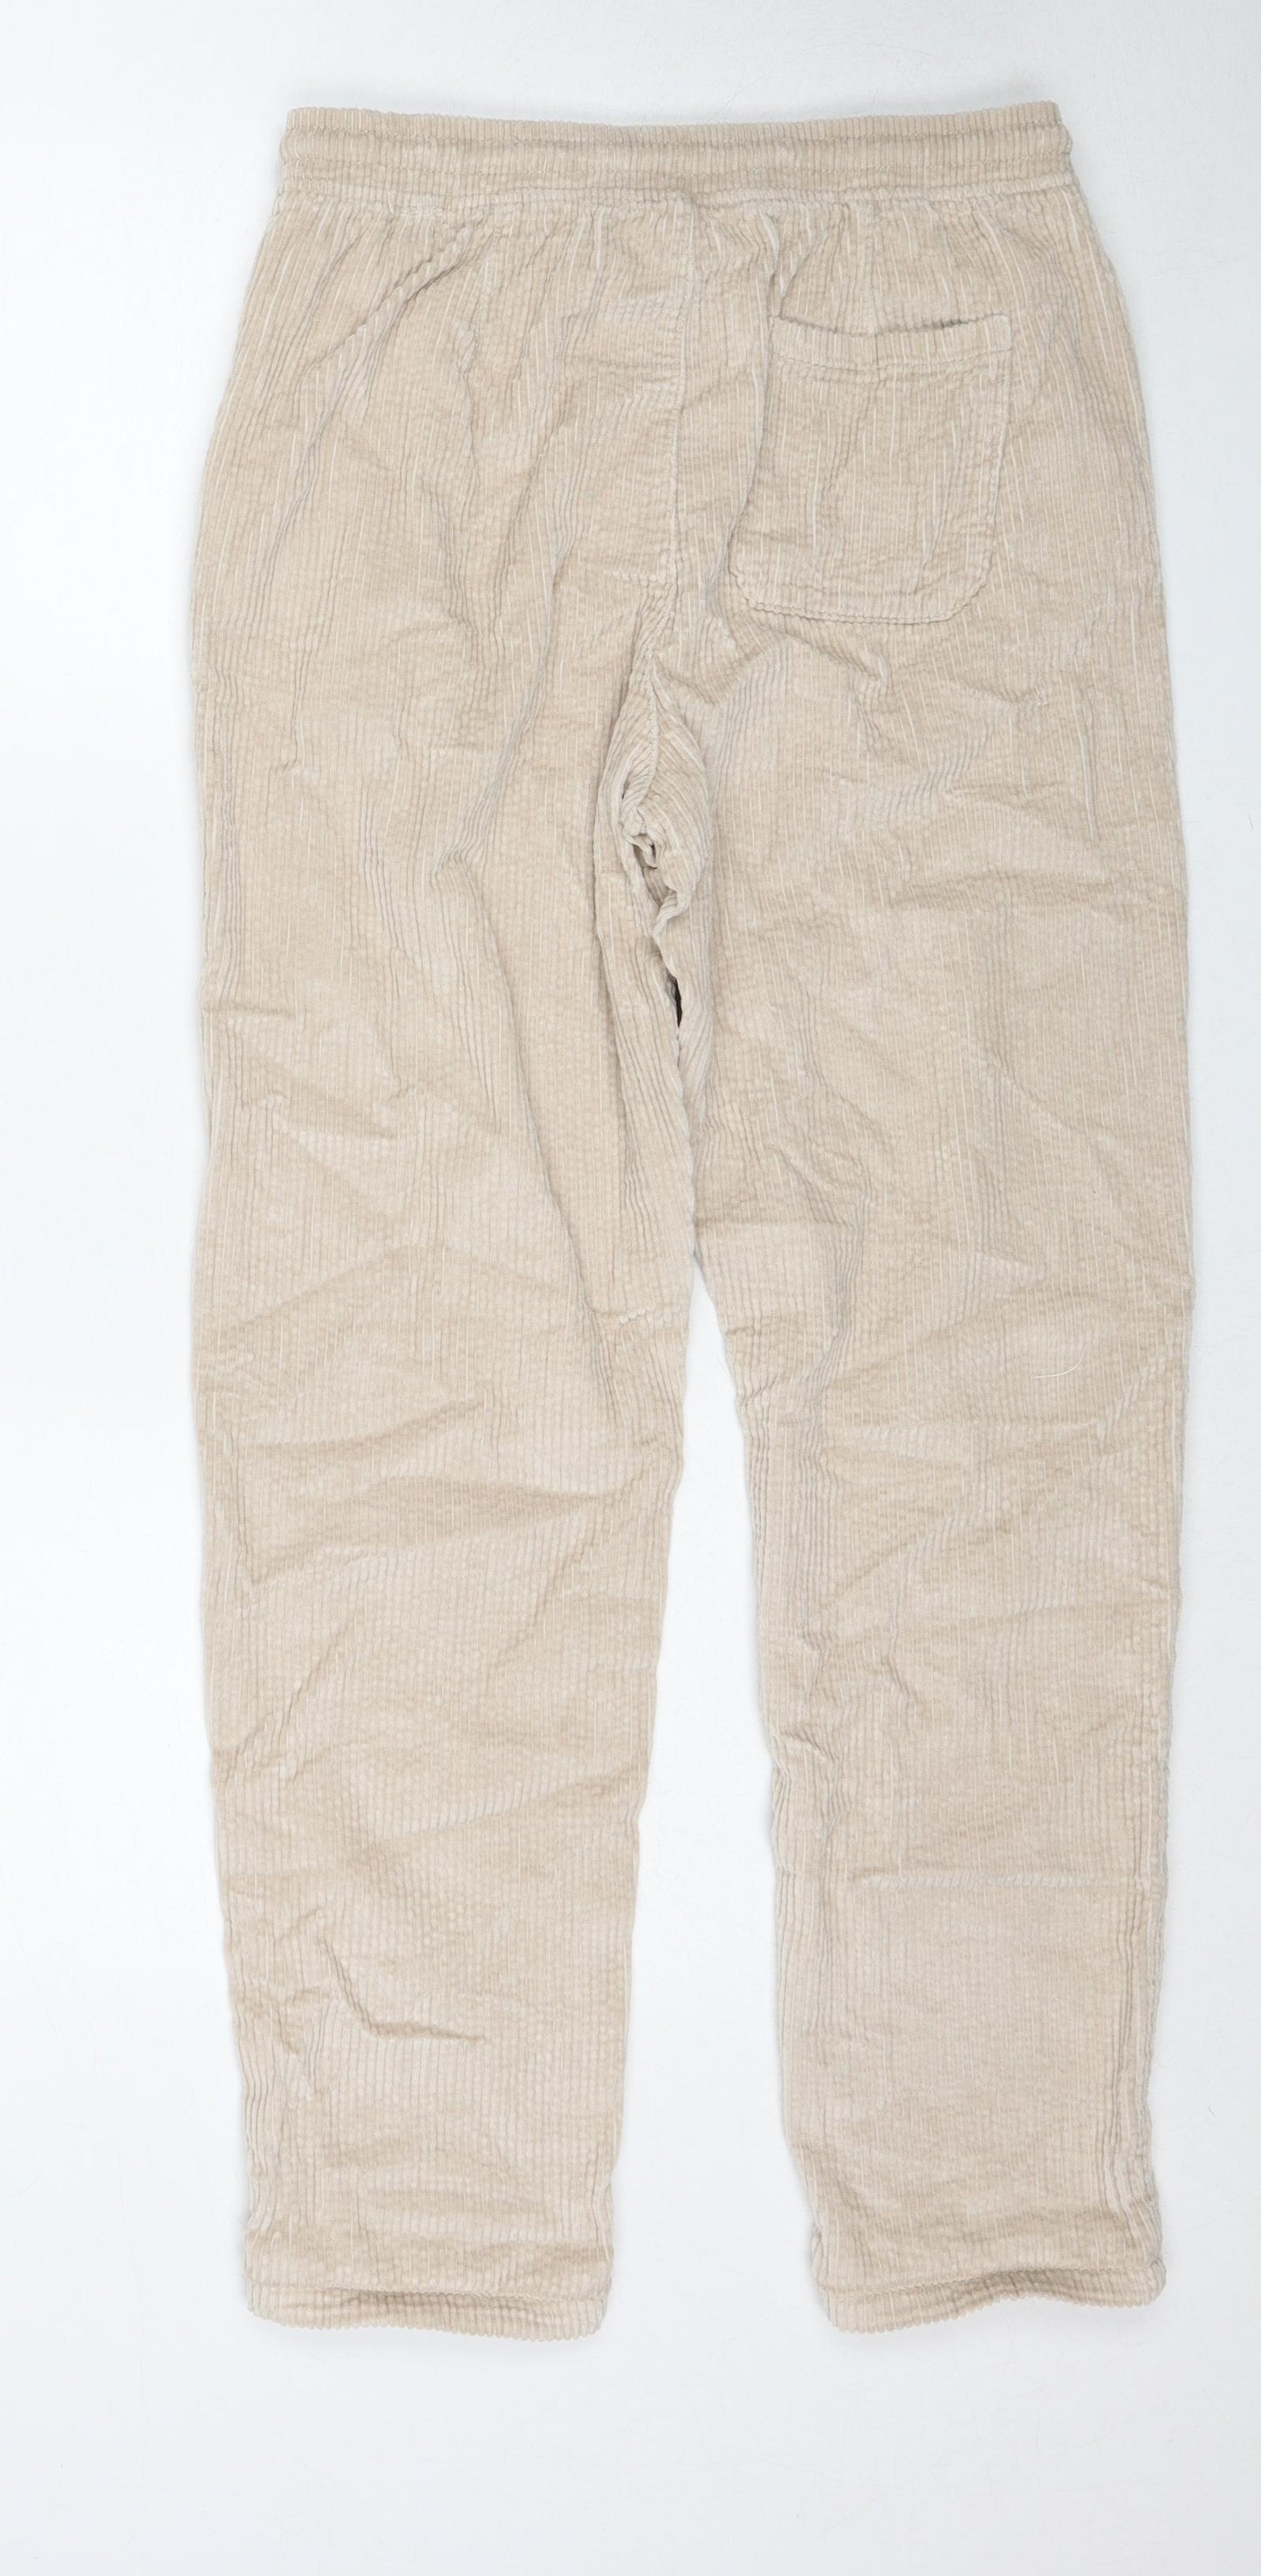 Marks and Spencer Boys Beige Cotton Jogger Trousers Size 13-14 Years Regular Drawstring